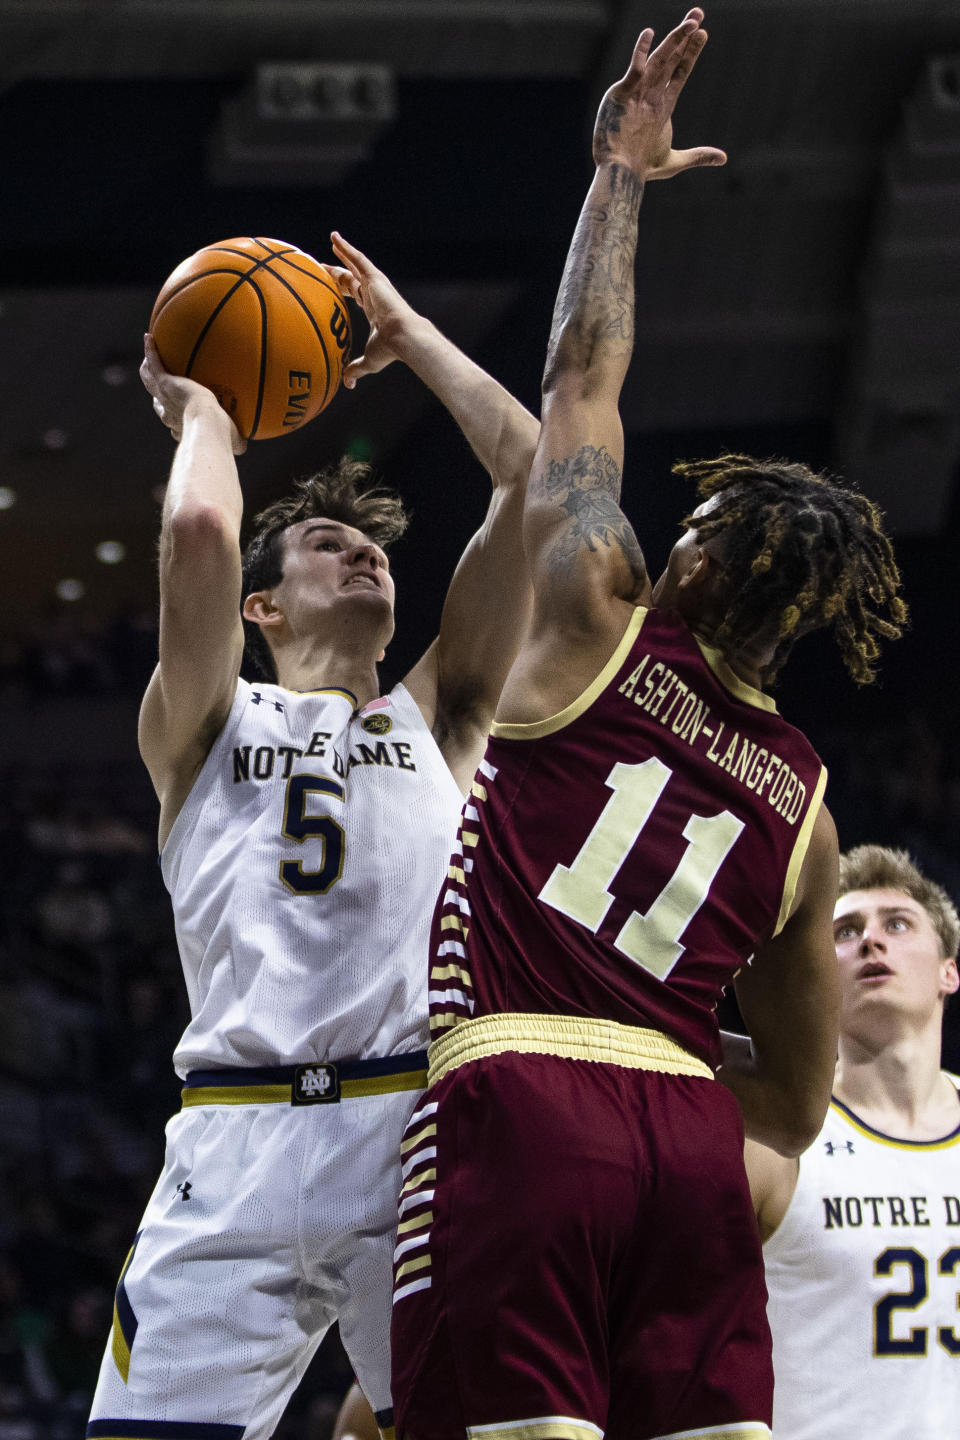 Notre Dame's Cormac Ryan (5) shoots as Boston College's Makai Ashton-Langford (11) defends during the second half of an NCAA college basketball game Saturday, Jan. 21, 2023 in South Bend, Ind. (AP Photo/Michael Caterina)